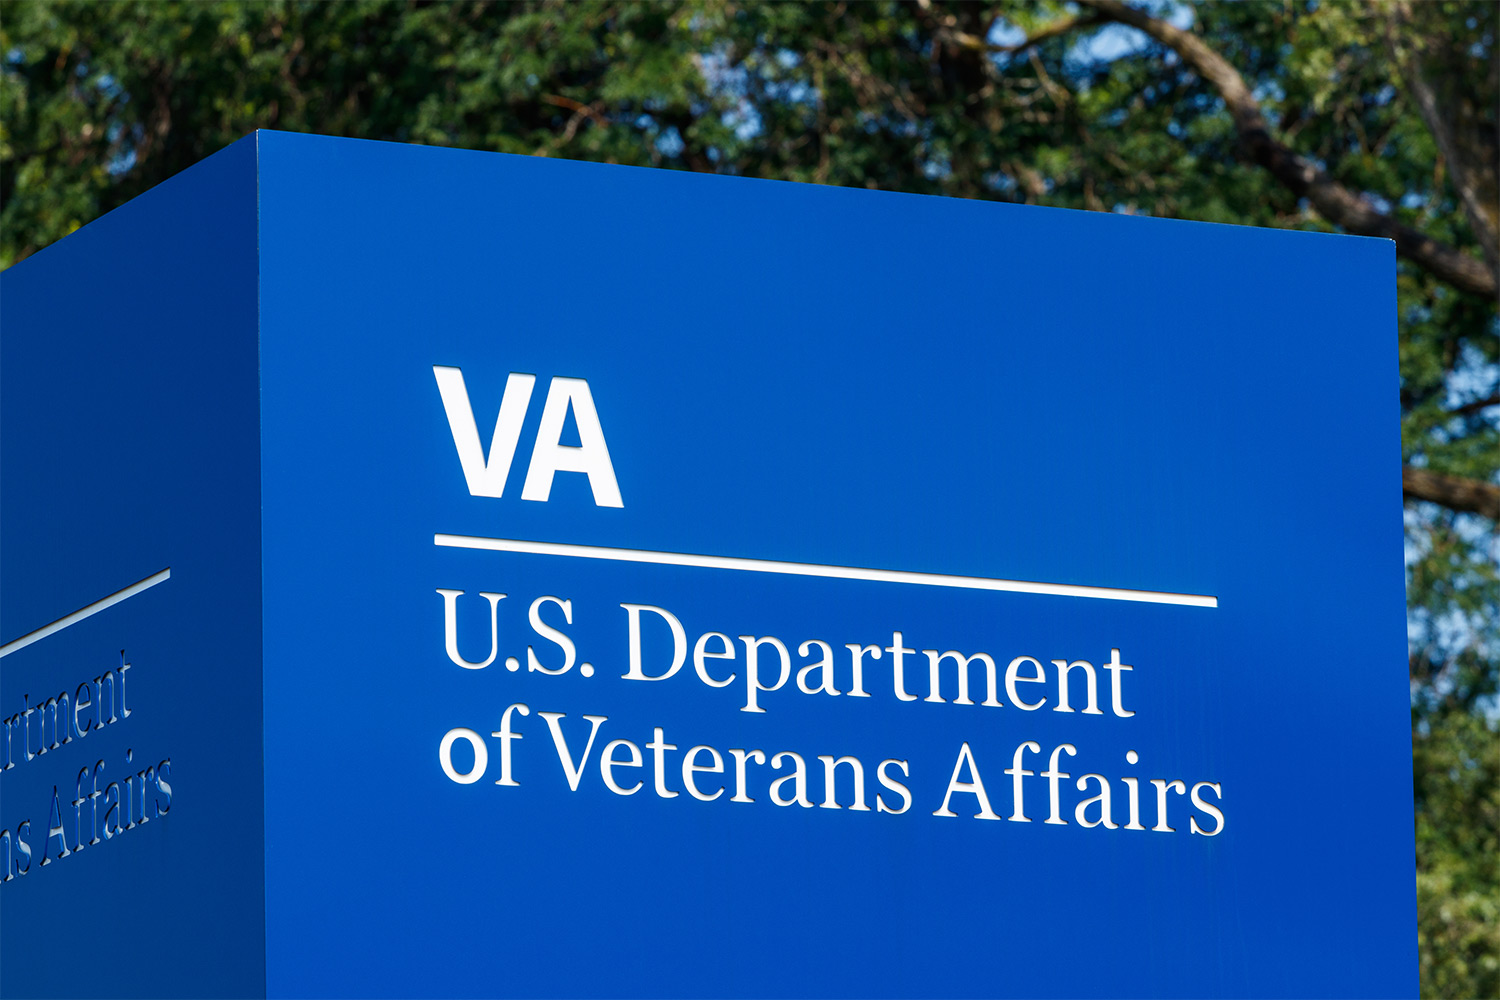 Can VA Disability Be Garnished or Not?